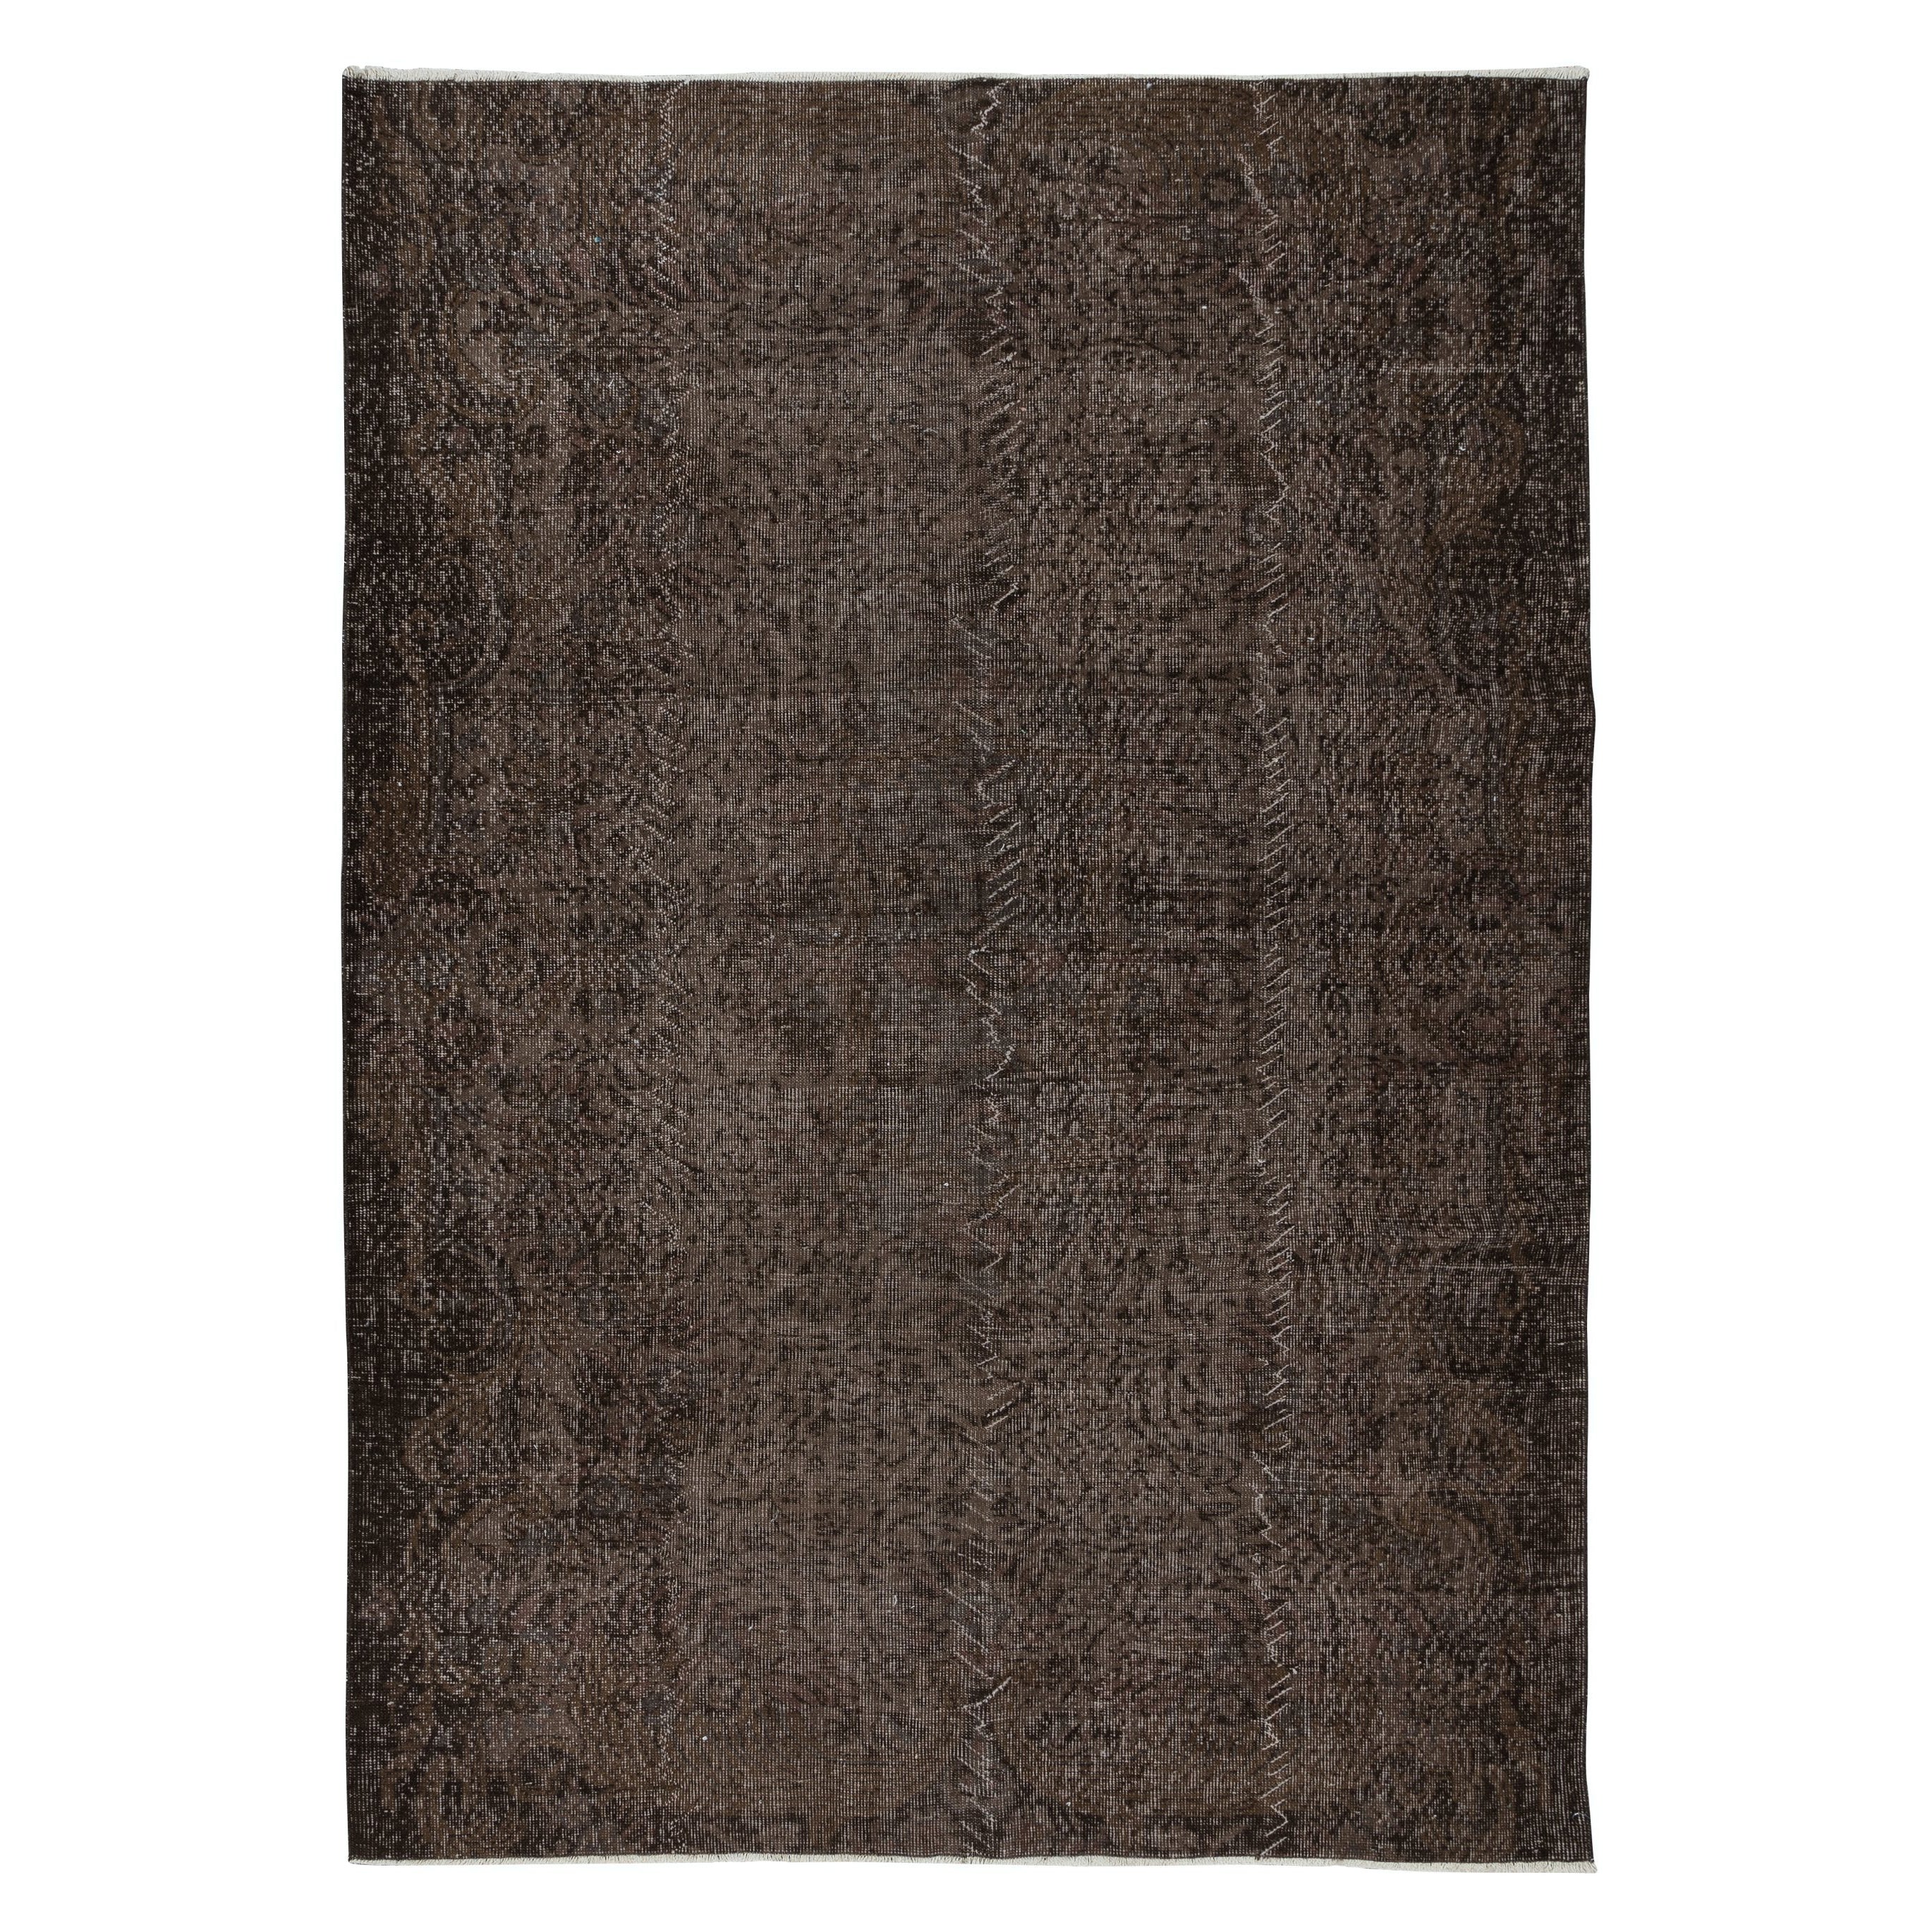 6x8.4 Ft Brown Solid Modern Area Rug for Modern Interiors, Handknotted in Turkey For Sale